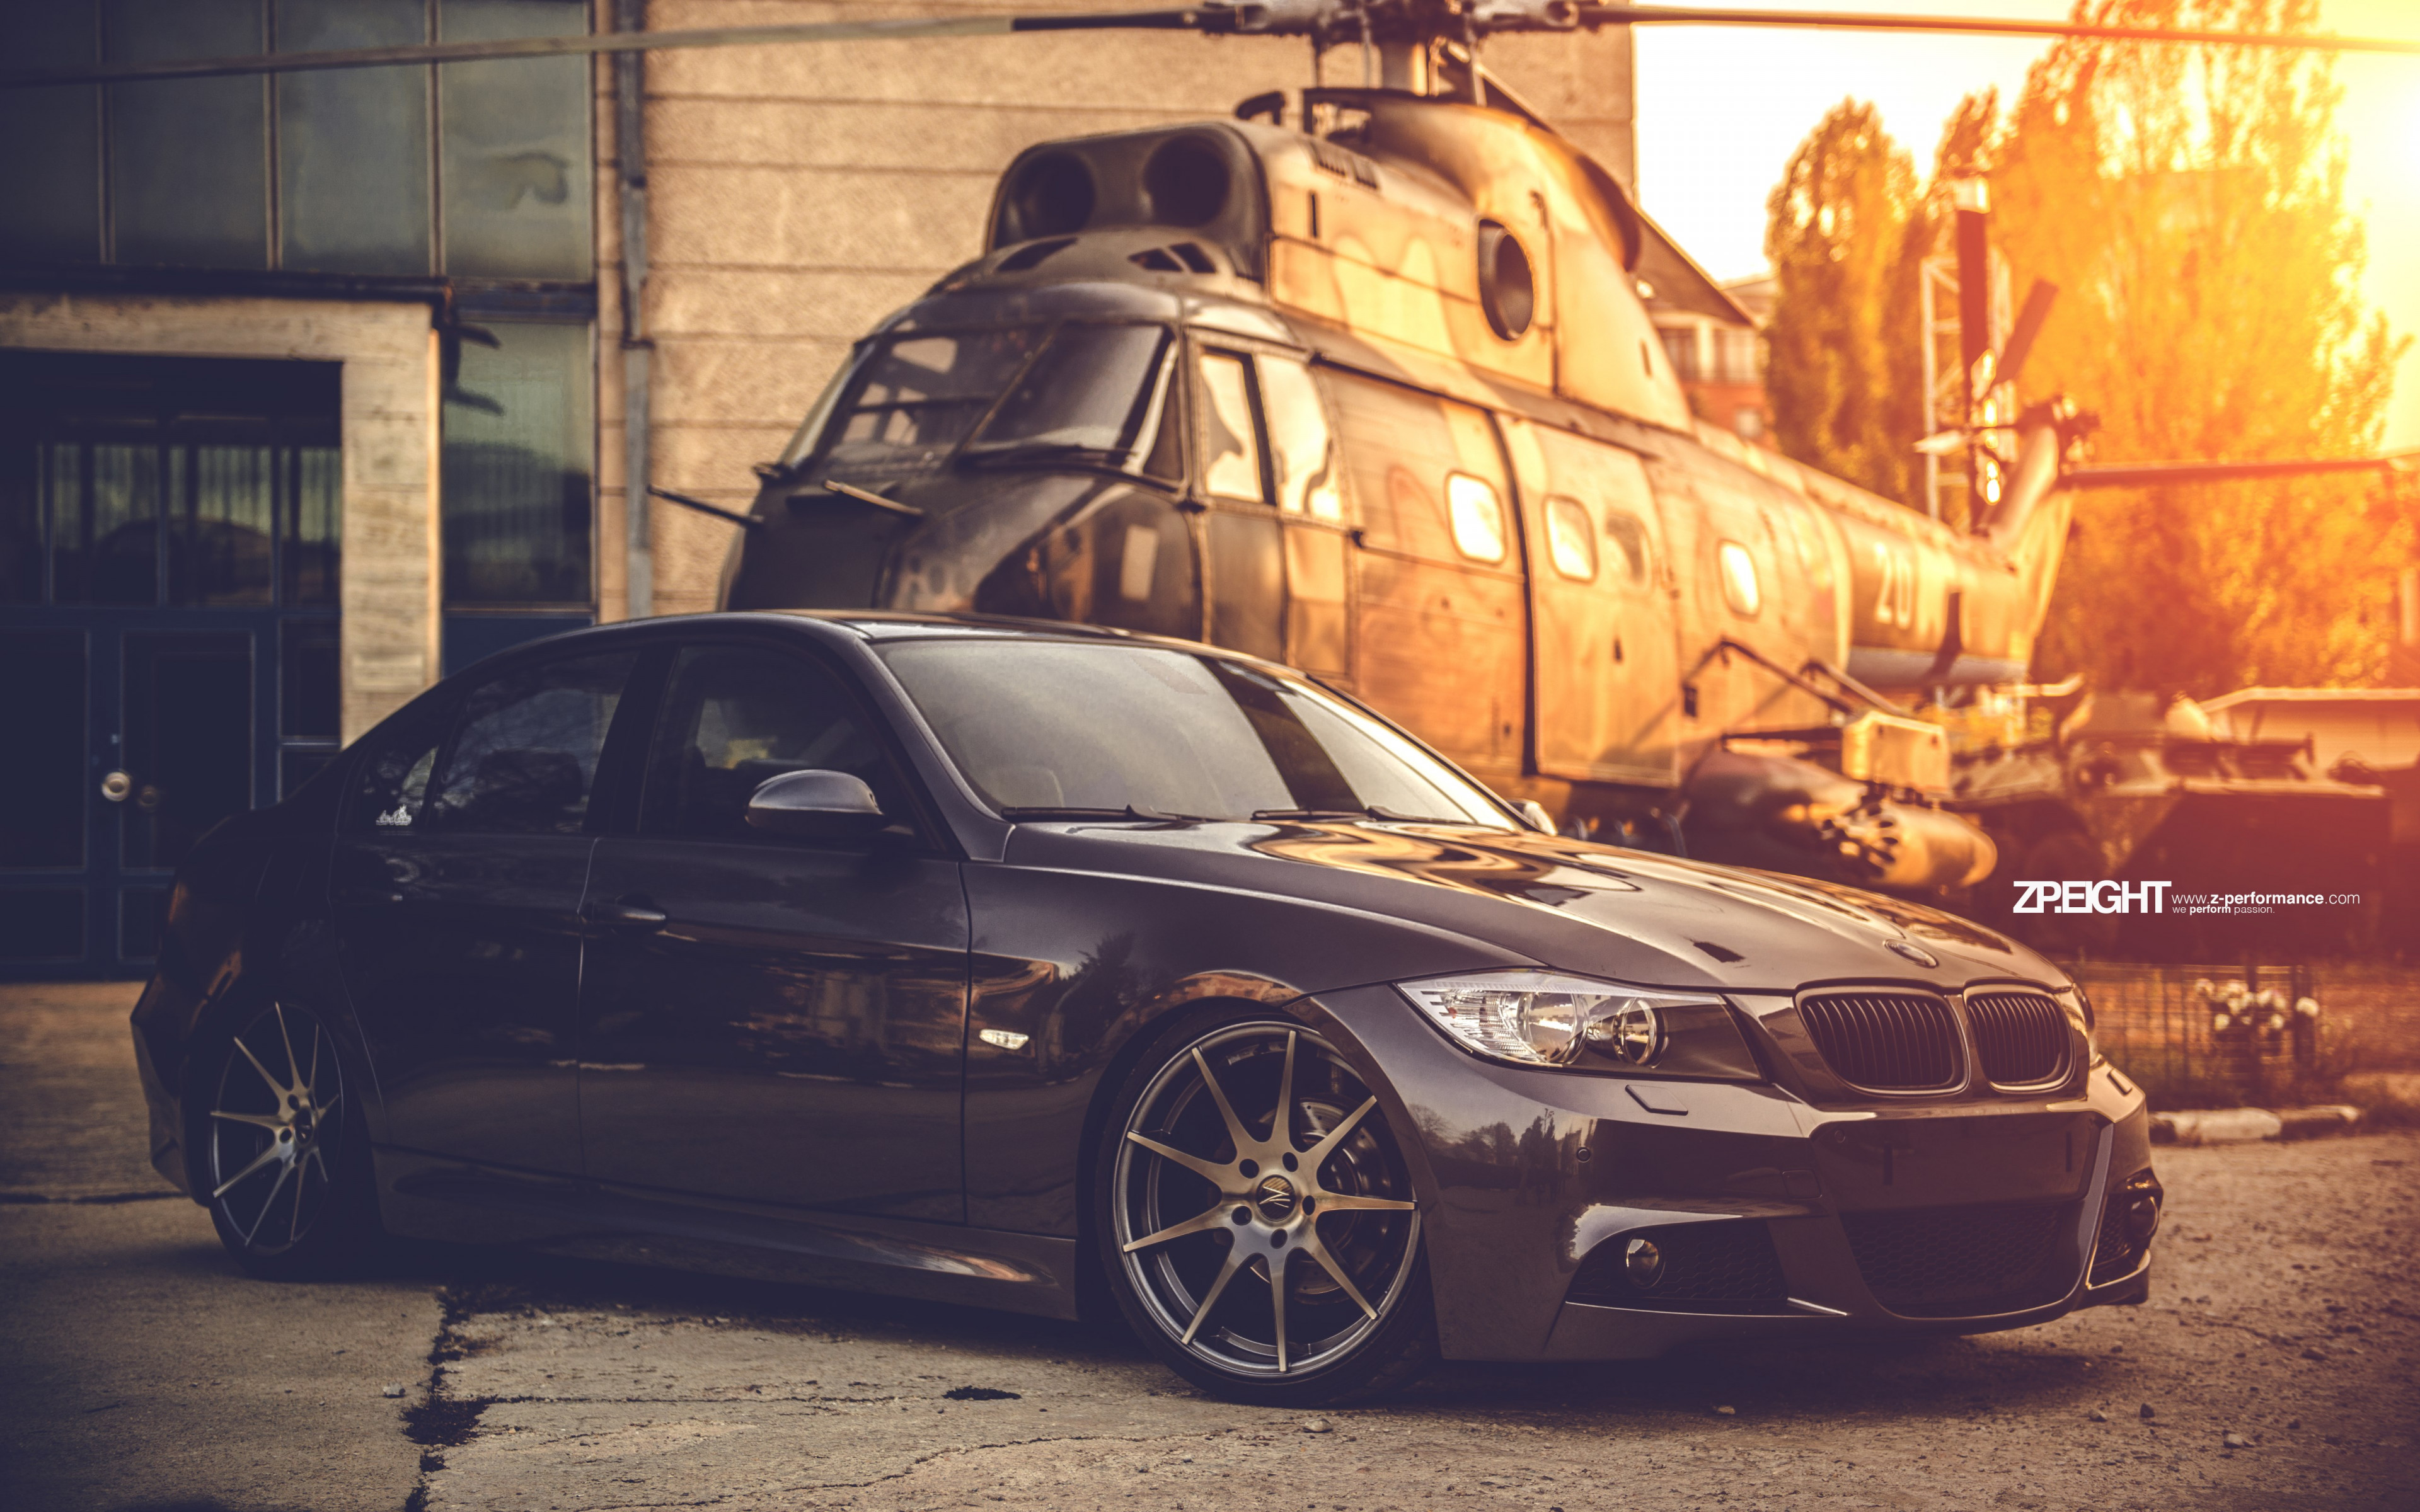 BMW E90 and one helicopter wallpaper 3840x2400